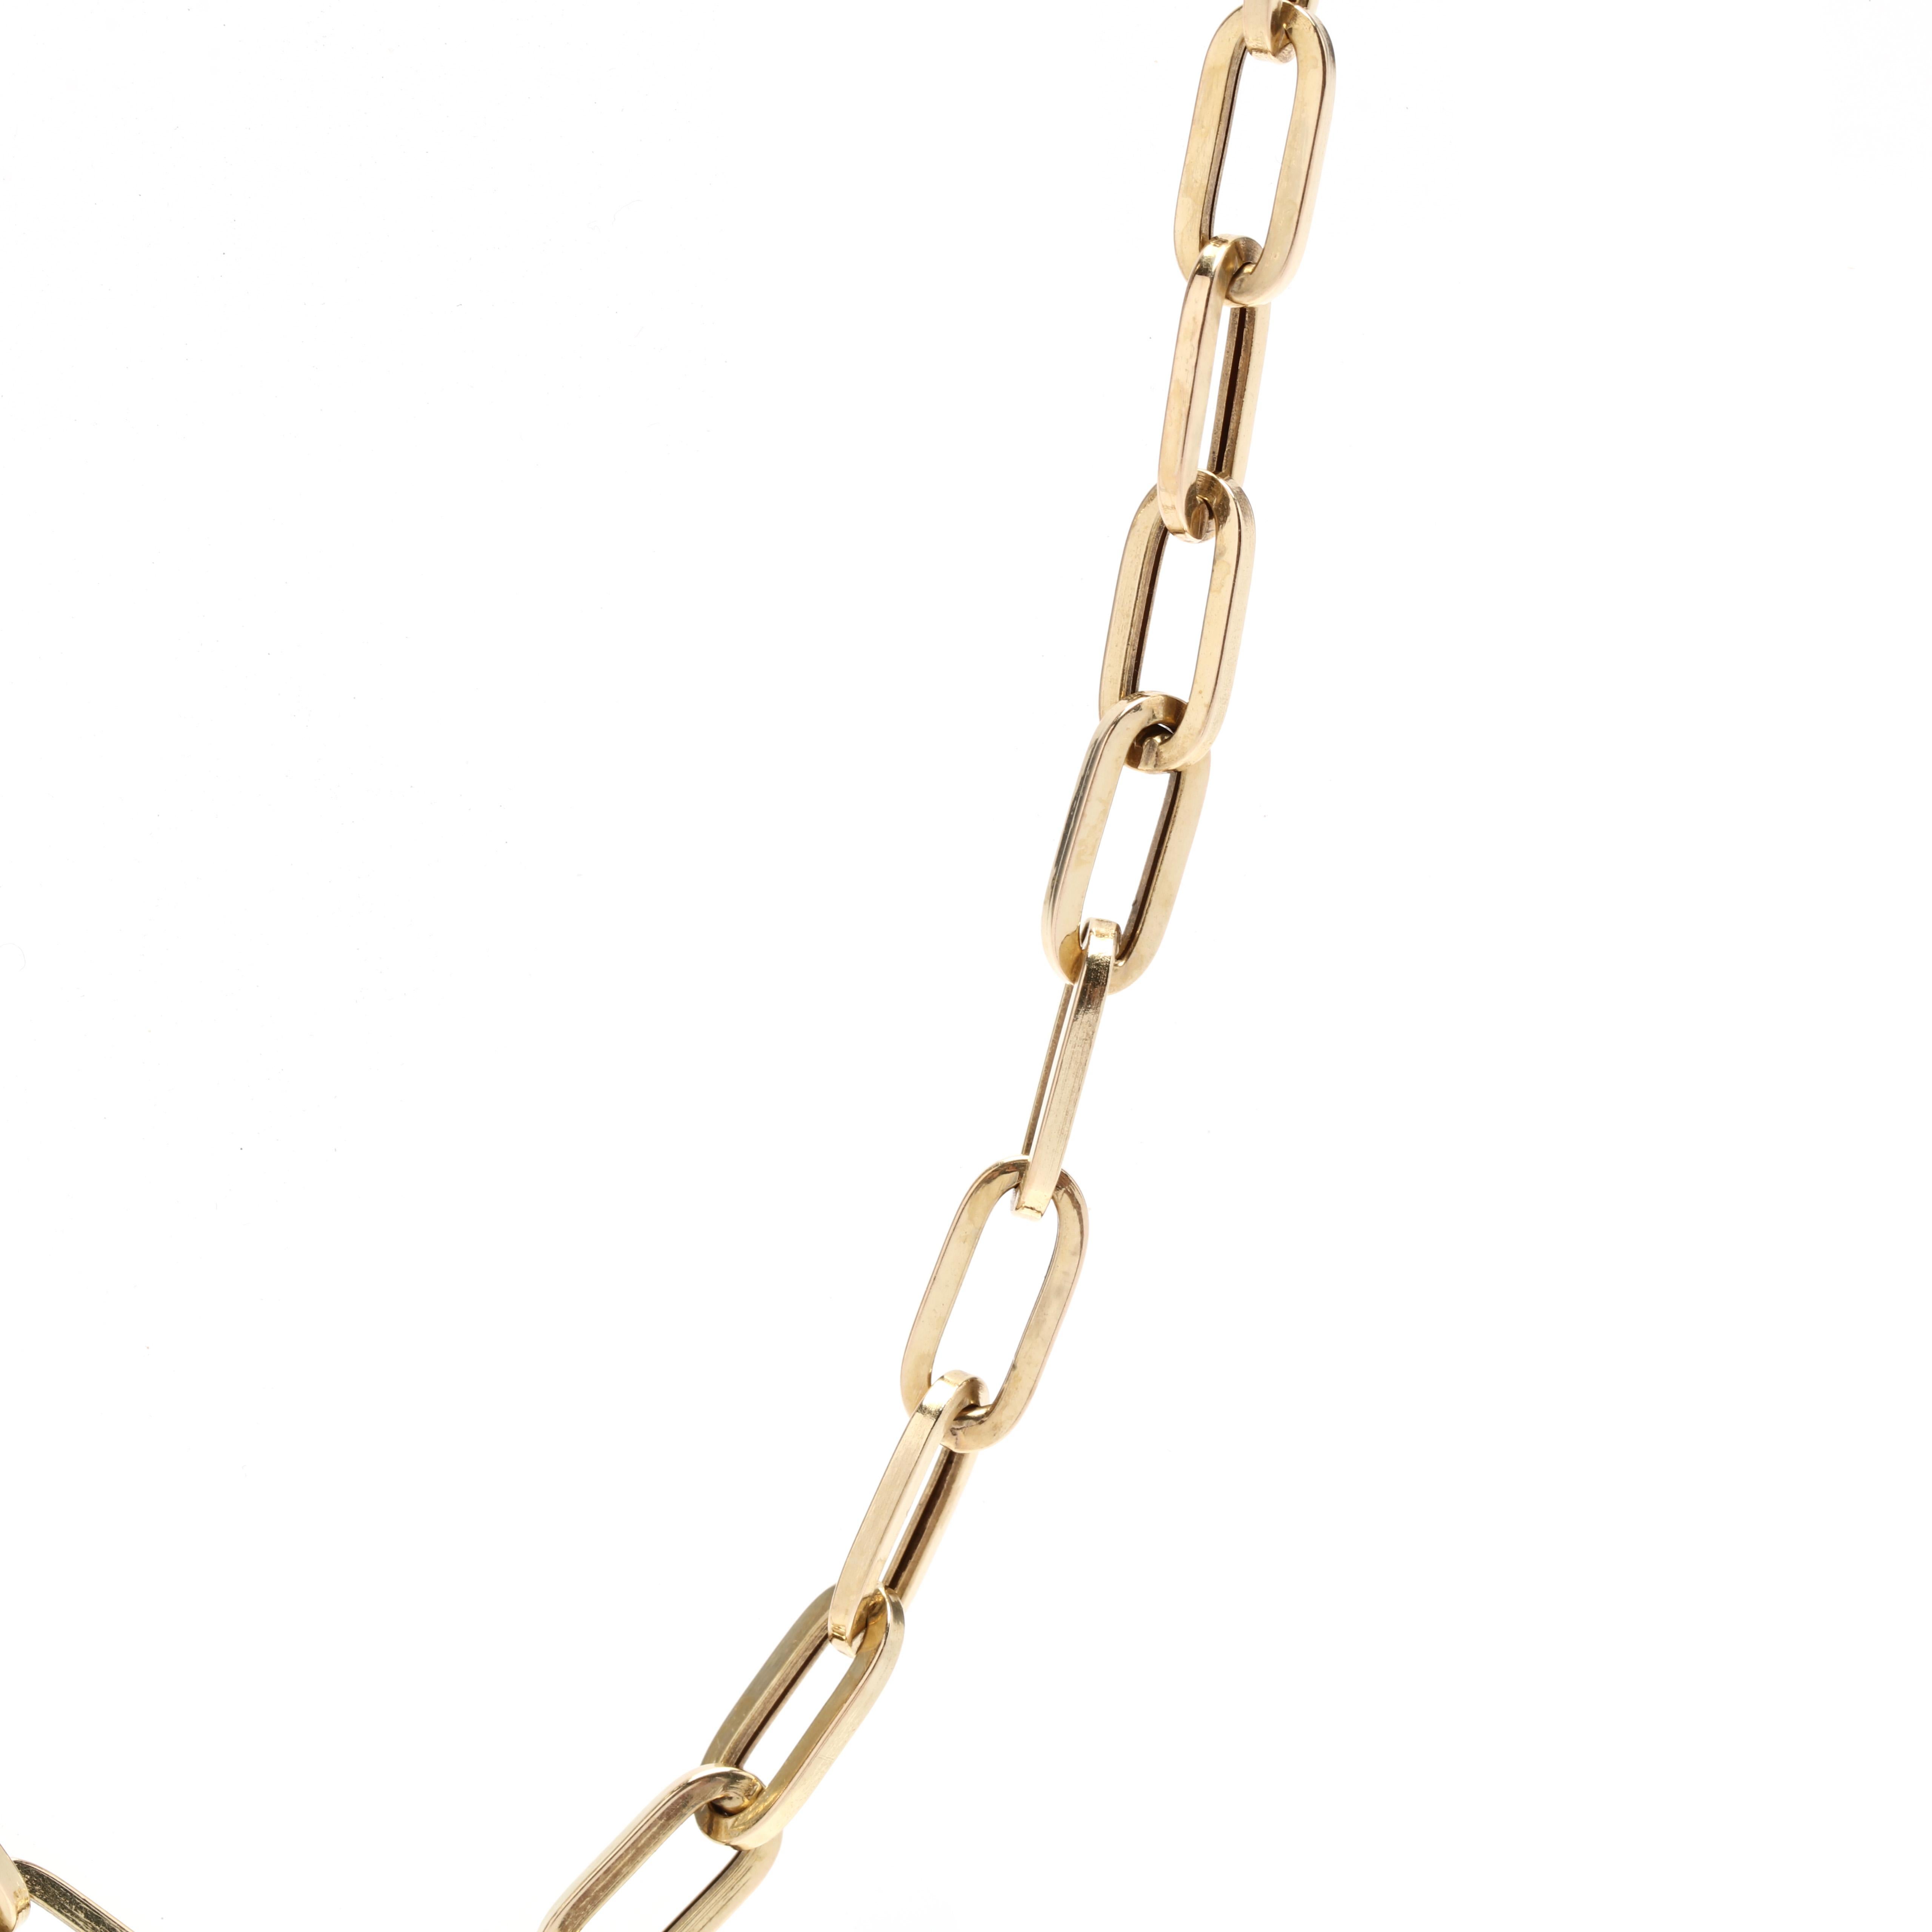 A vintage 14 karat yellow gold medium paperclip chain necklace. This simple chain features medium size, elongated oval links and with a lobster clasp.

Length: 18 in.

Width: 4.7 mm

Weight: 4.4 dwts. / 6.85 grams

Stamps: K14 ITALY

Ring Sizings &